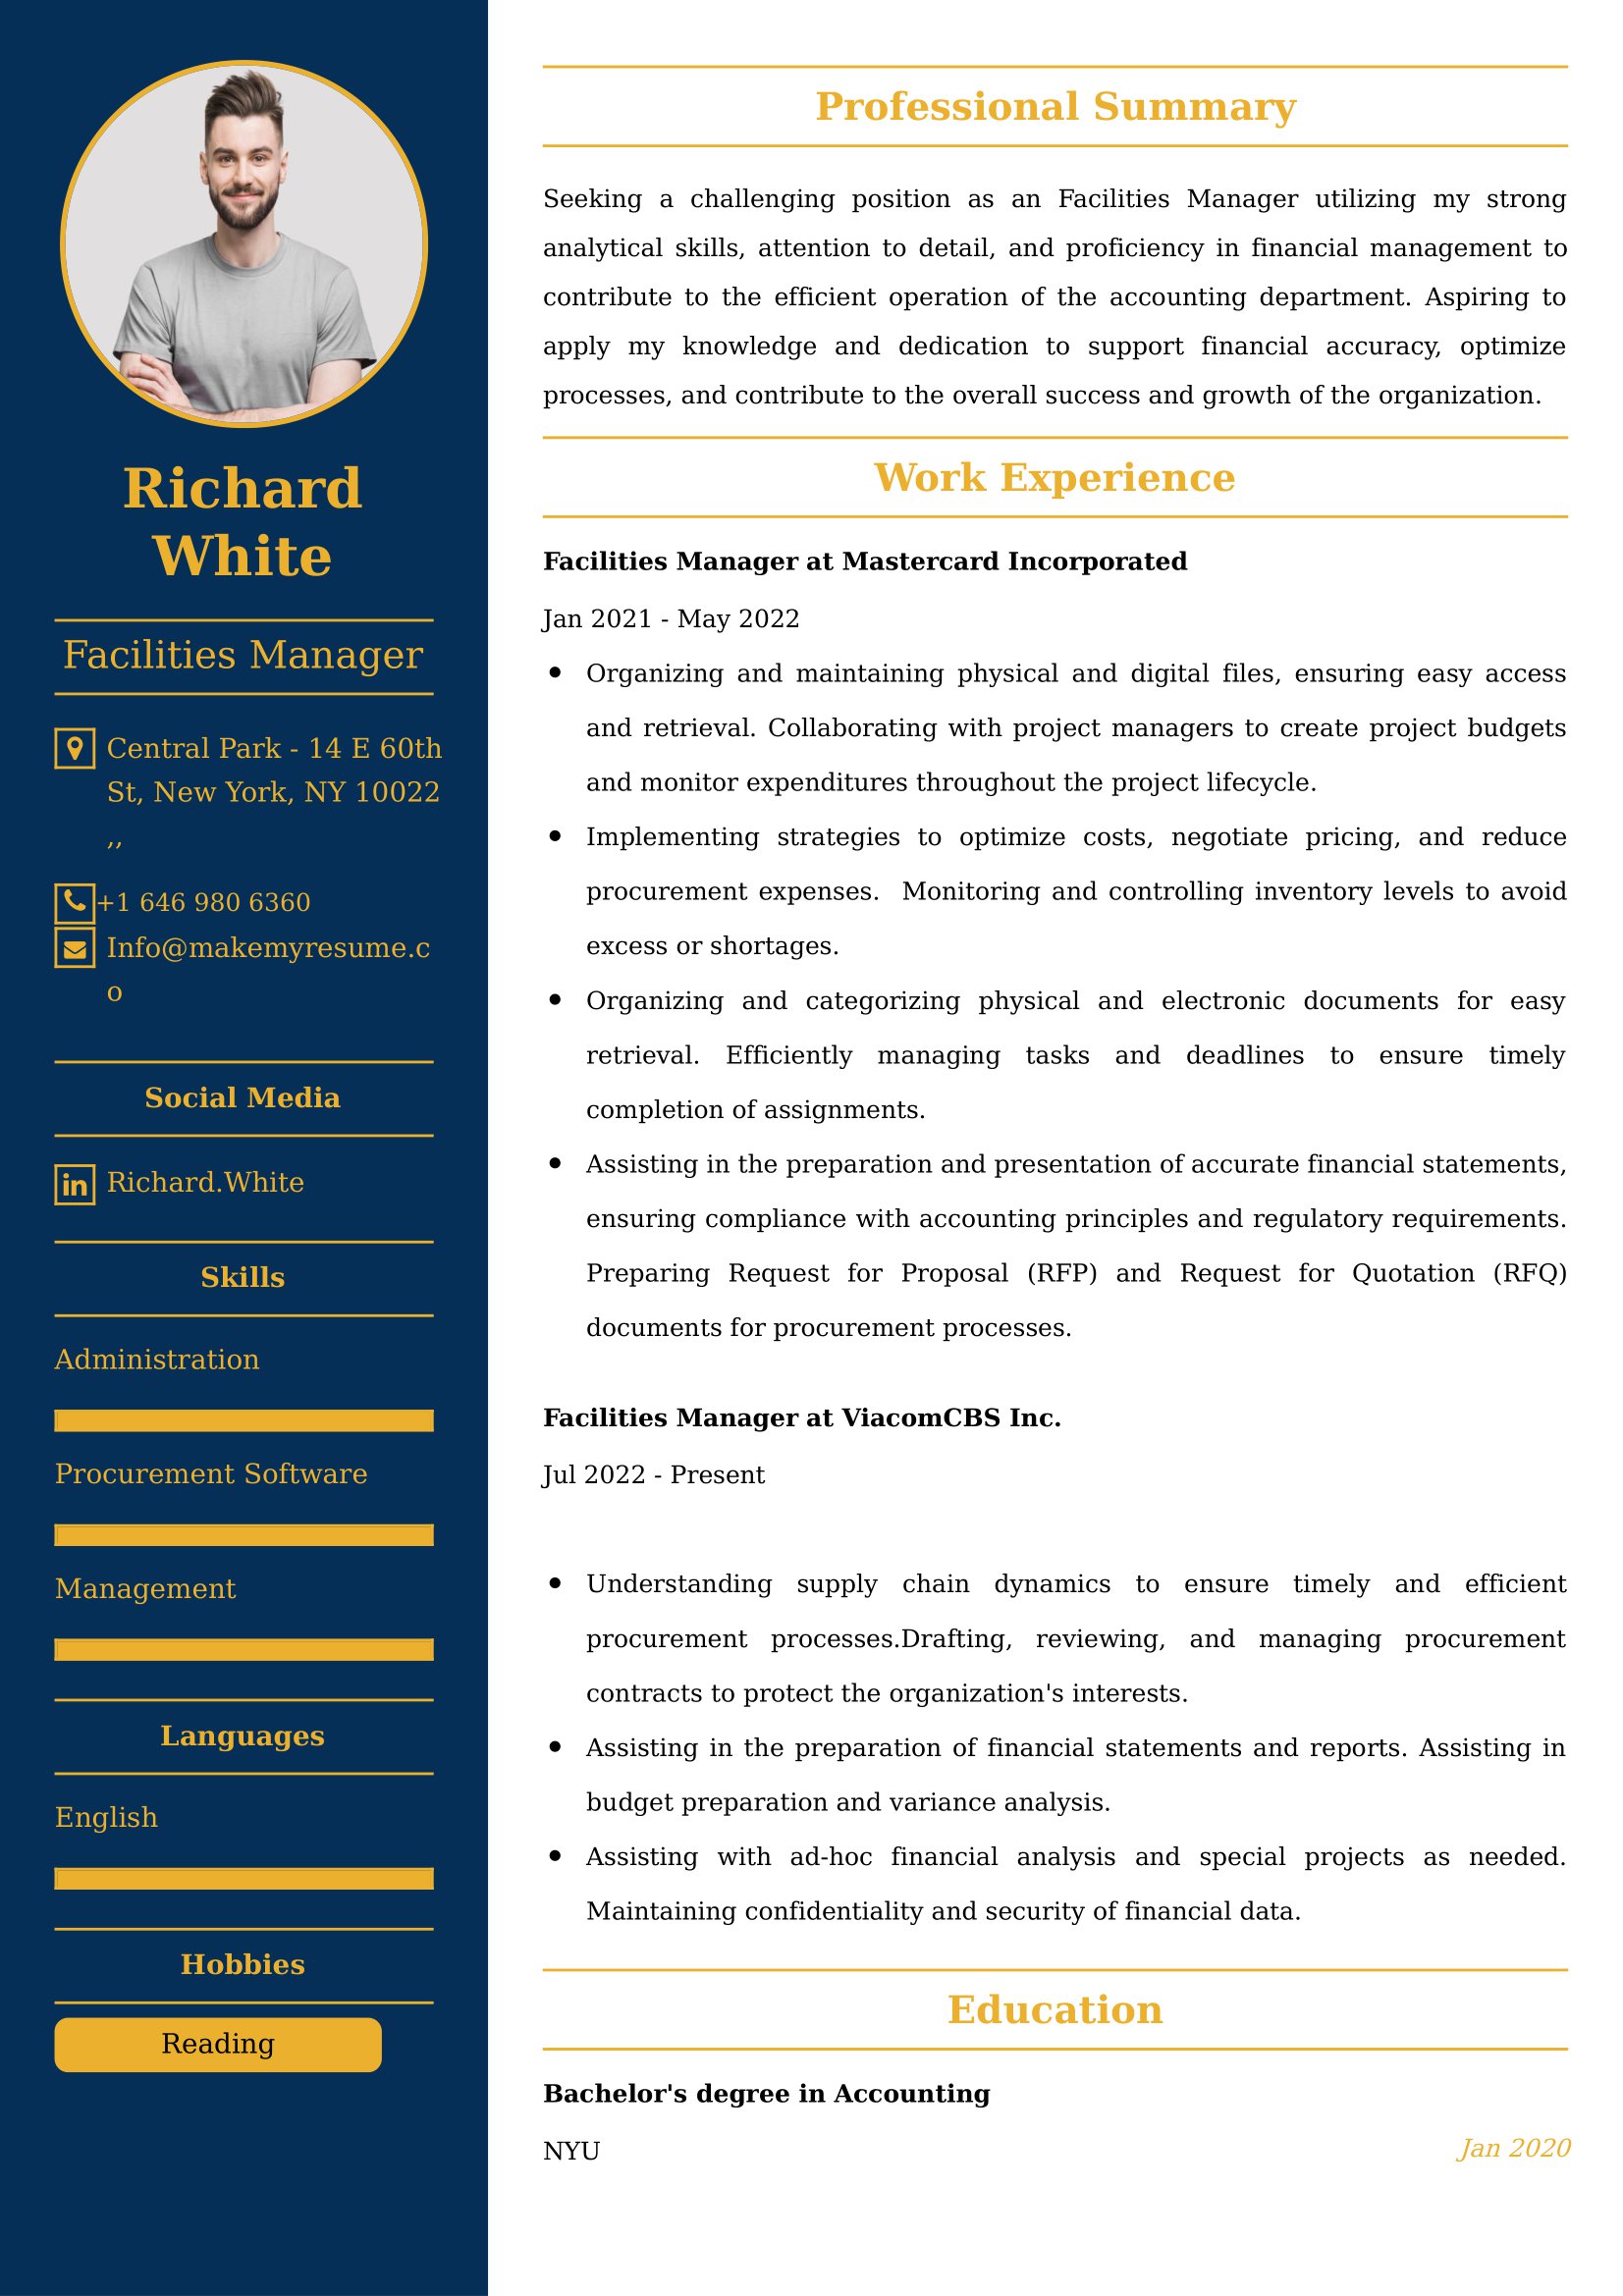 Facilities Manager Resume Examples for UK Jobs - Tips and Guide